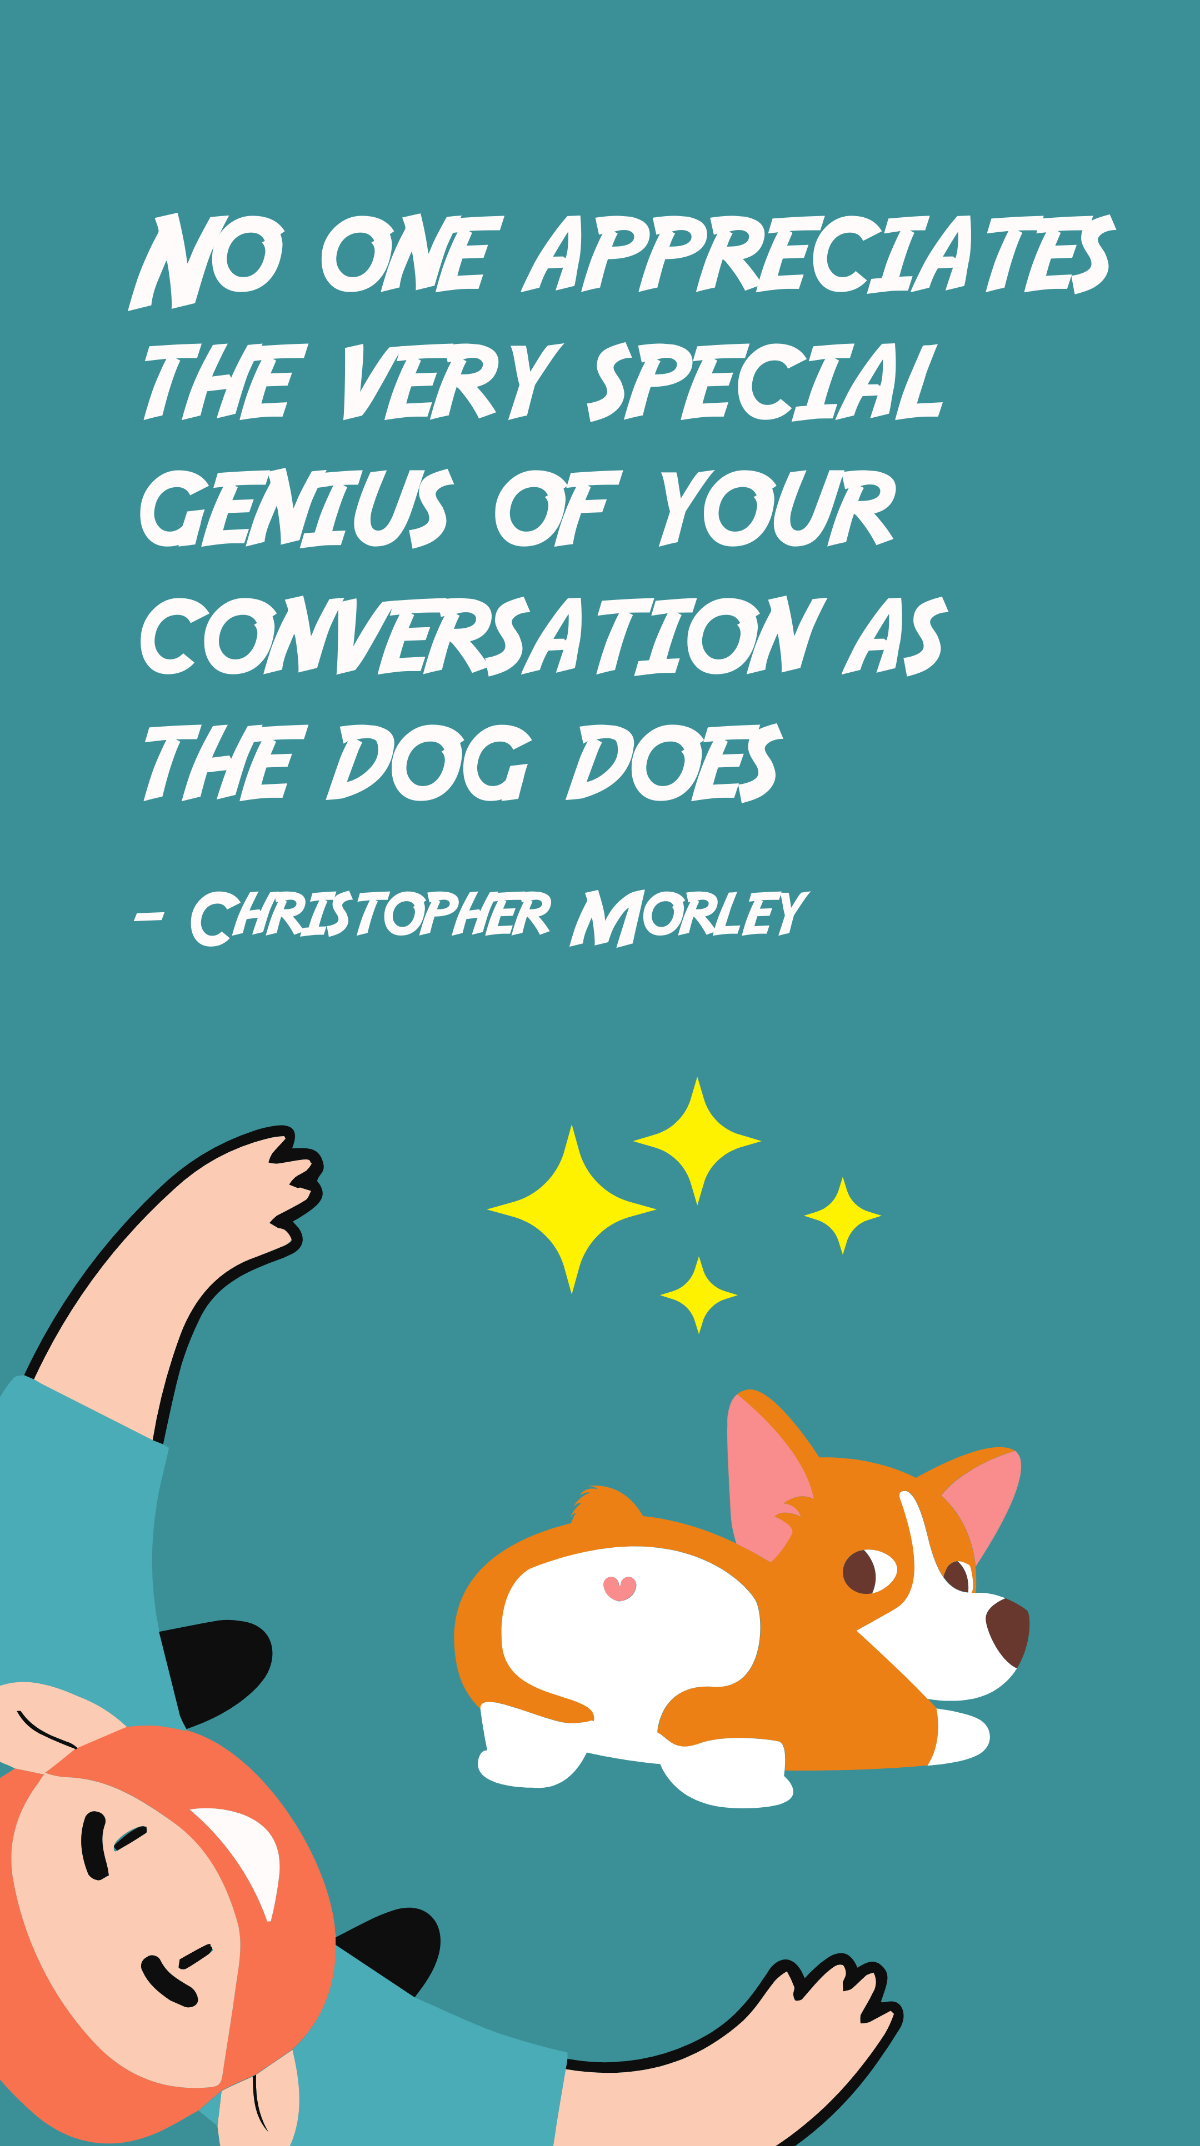 Christopher Morley - No one appreciates the very special genius of your conversation as the dog does Template